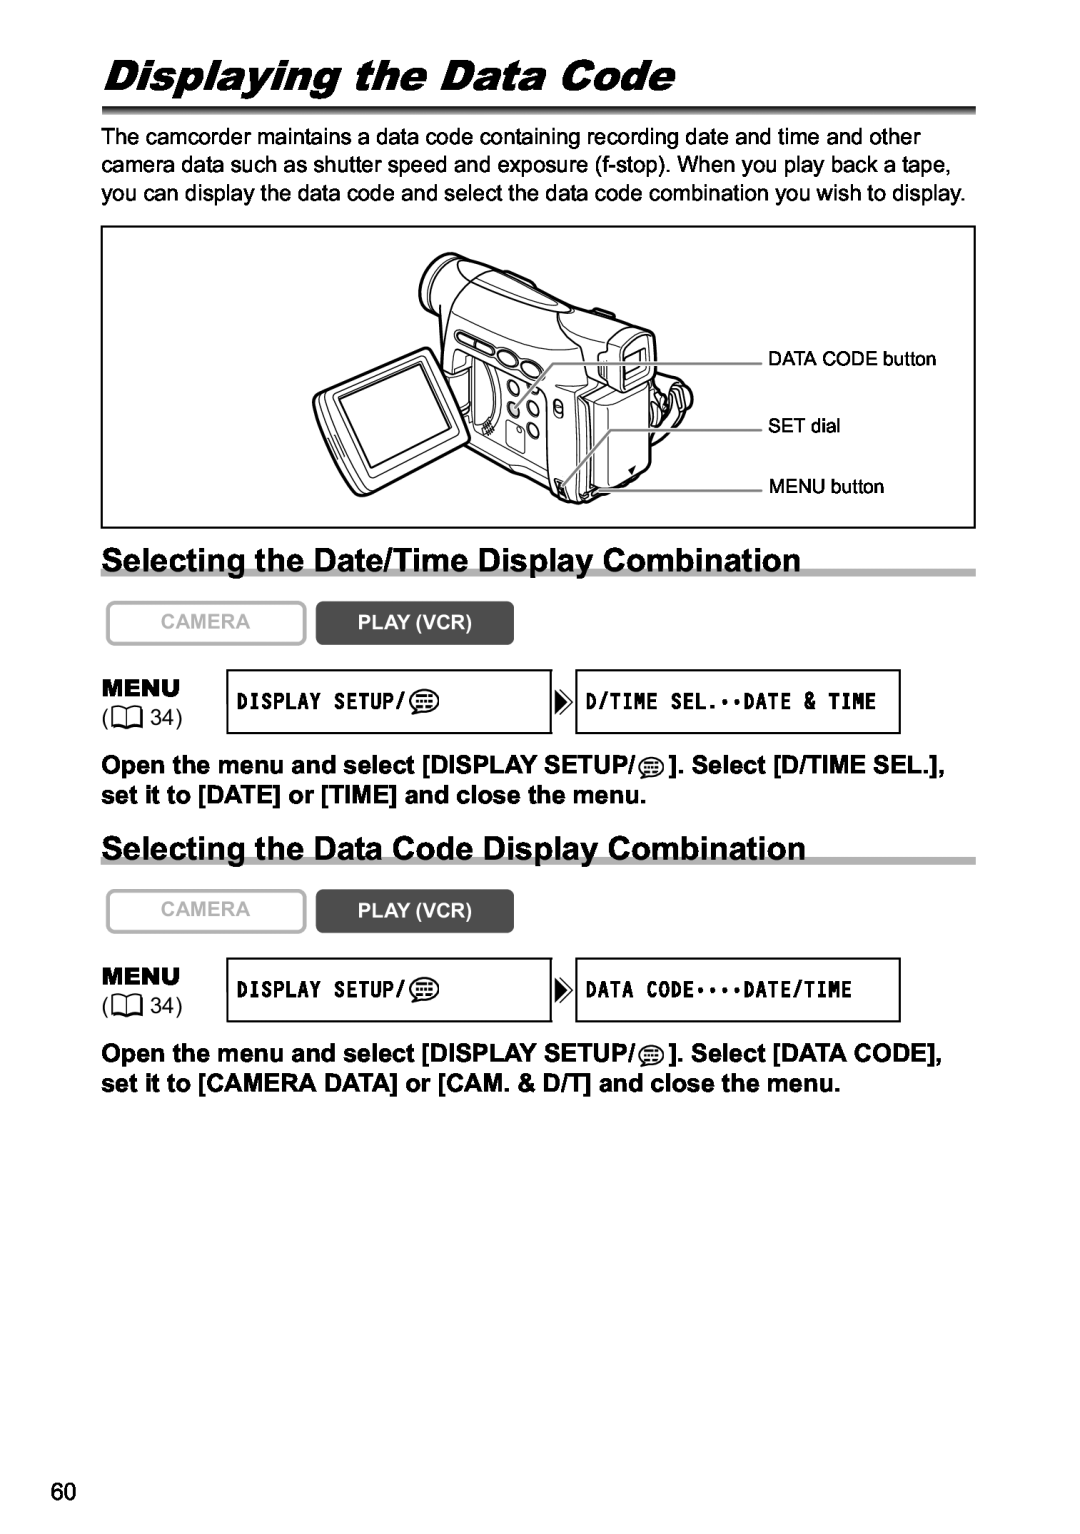 Canon MV790, MV800i Displaying the Data Code, Selecting the Date/Time Display Combination, D/Time Sel.Date & Time, Menu 